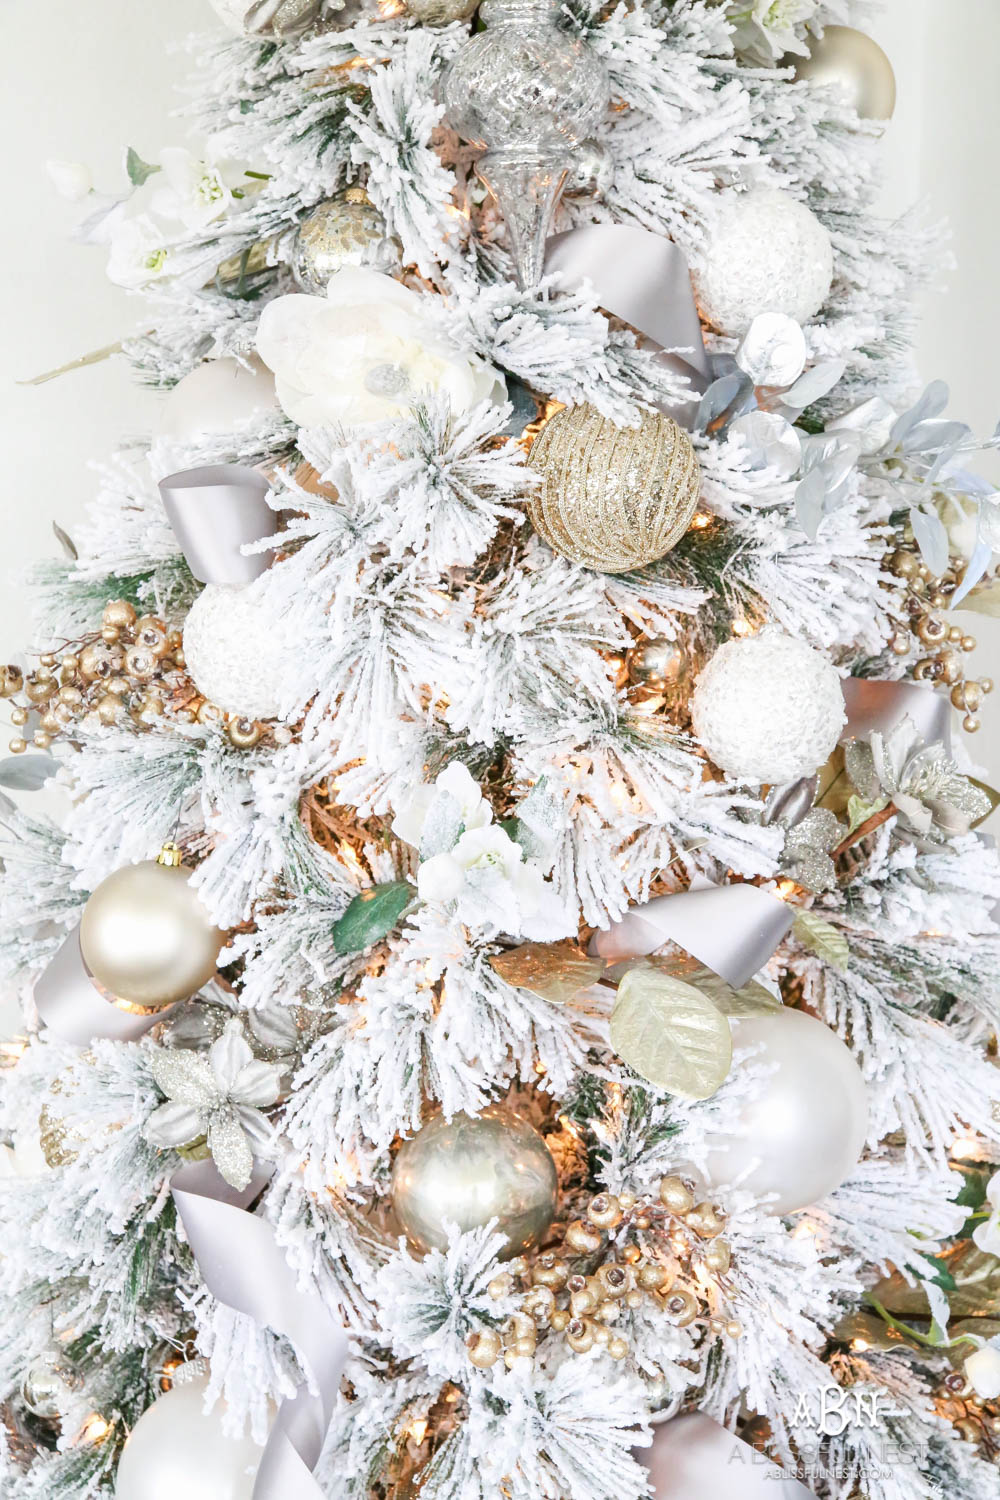 Silver and gold Christmas tree in an open concept floor plan with lots of blue home decor accents. Check out all the white, silver and gold Christmas decor in this holiday home tour on ABlissfulNest.com. #ABlissfulNest #Christmasdecor #Christmasdecorating #CoastalChristmasdecor